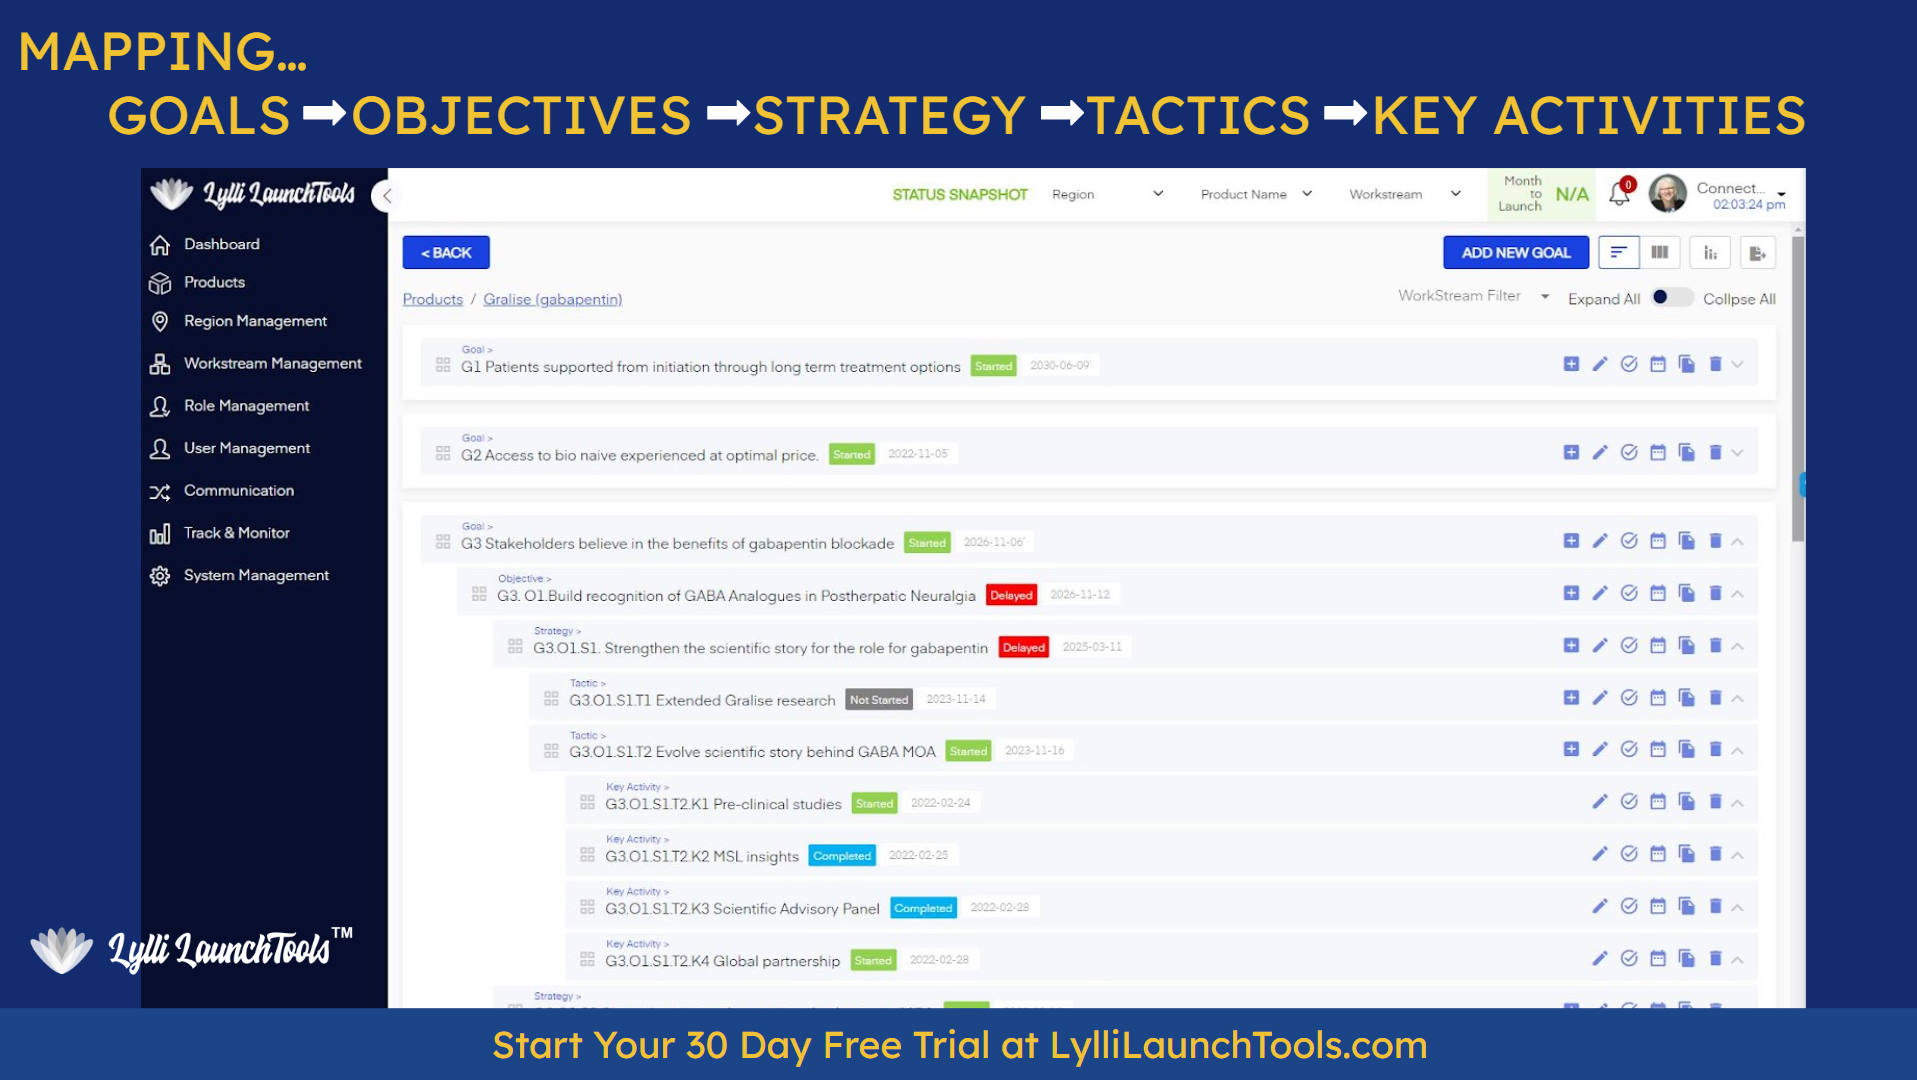 Lylli LaunchTools Go To Market Strategy Roadmap is dynamic & interactive which helps Pharmaceutical & Medical Device companies Launch Better, Faster & Smoother. Start for free today at LylliLaunchTools.com/signup